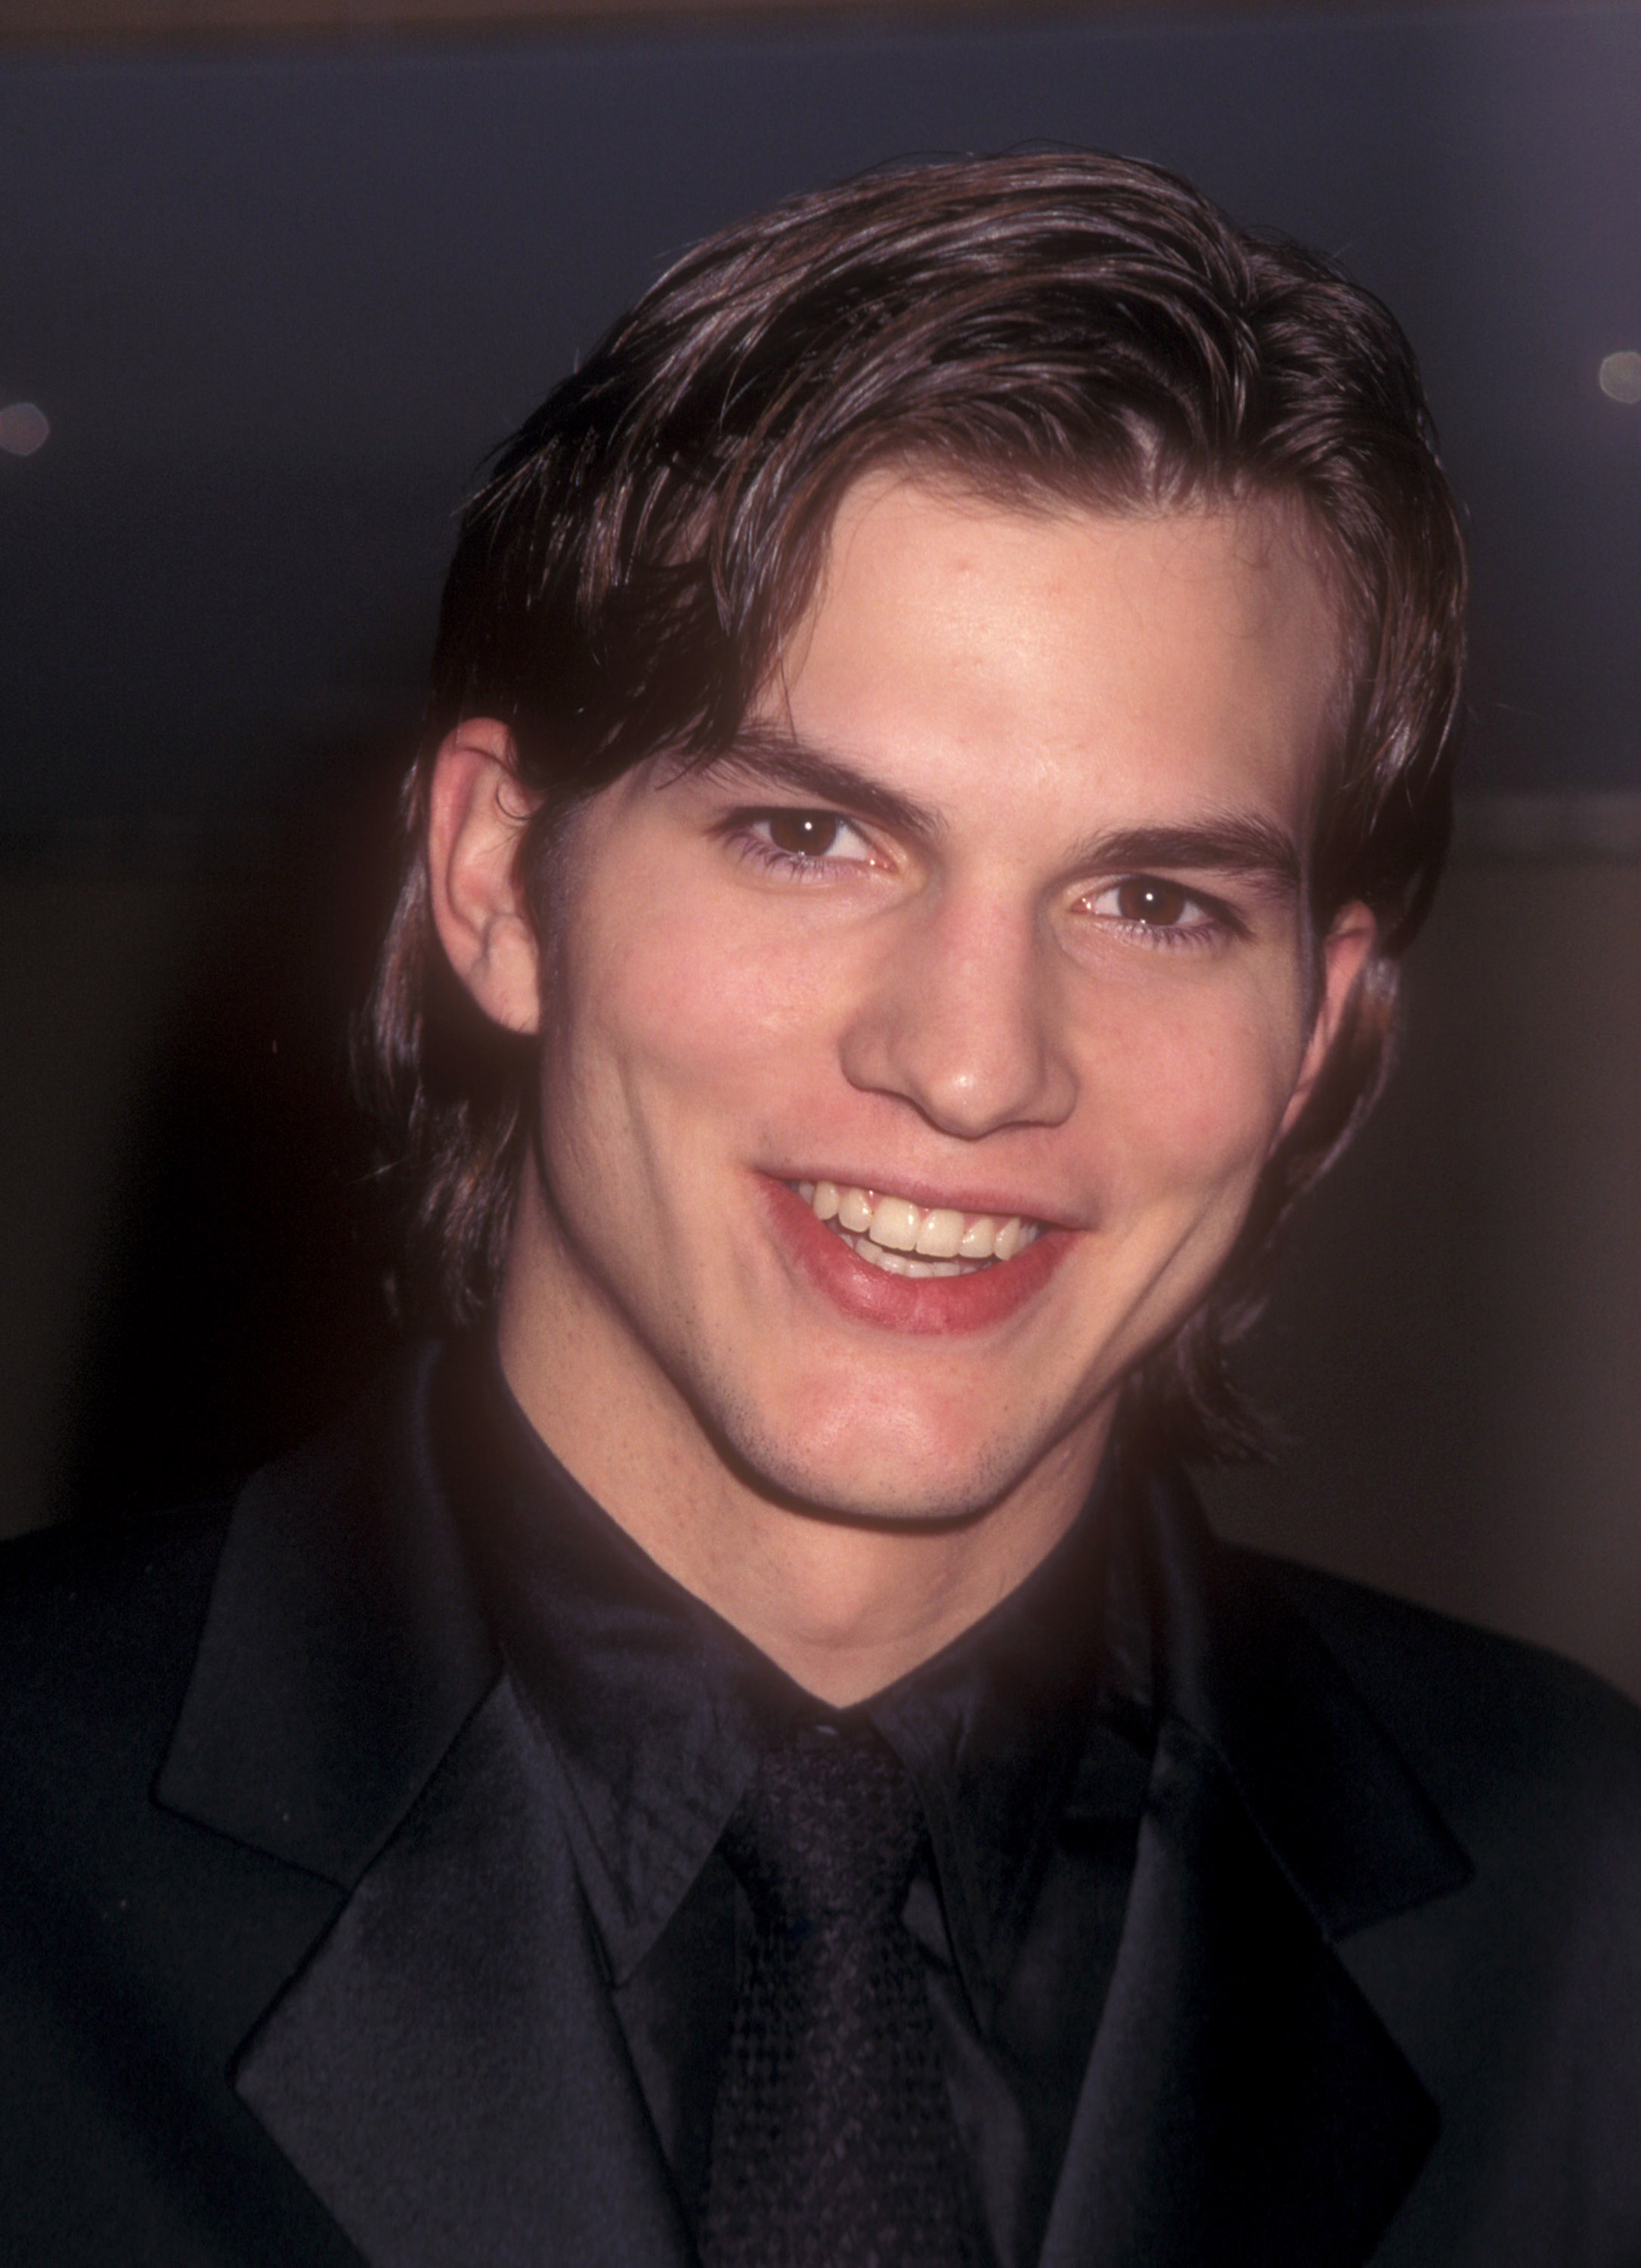 Ashton Kutcher during 19th Annual St. Judes Gala in Beverly Hills, California, on March 4, 1999. | Source: Getty Images